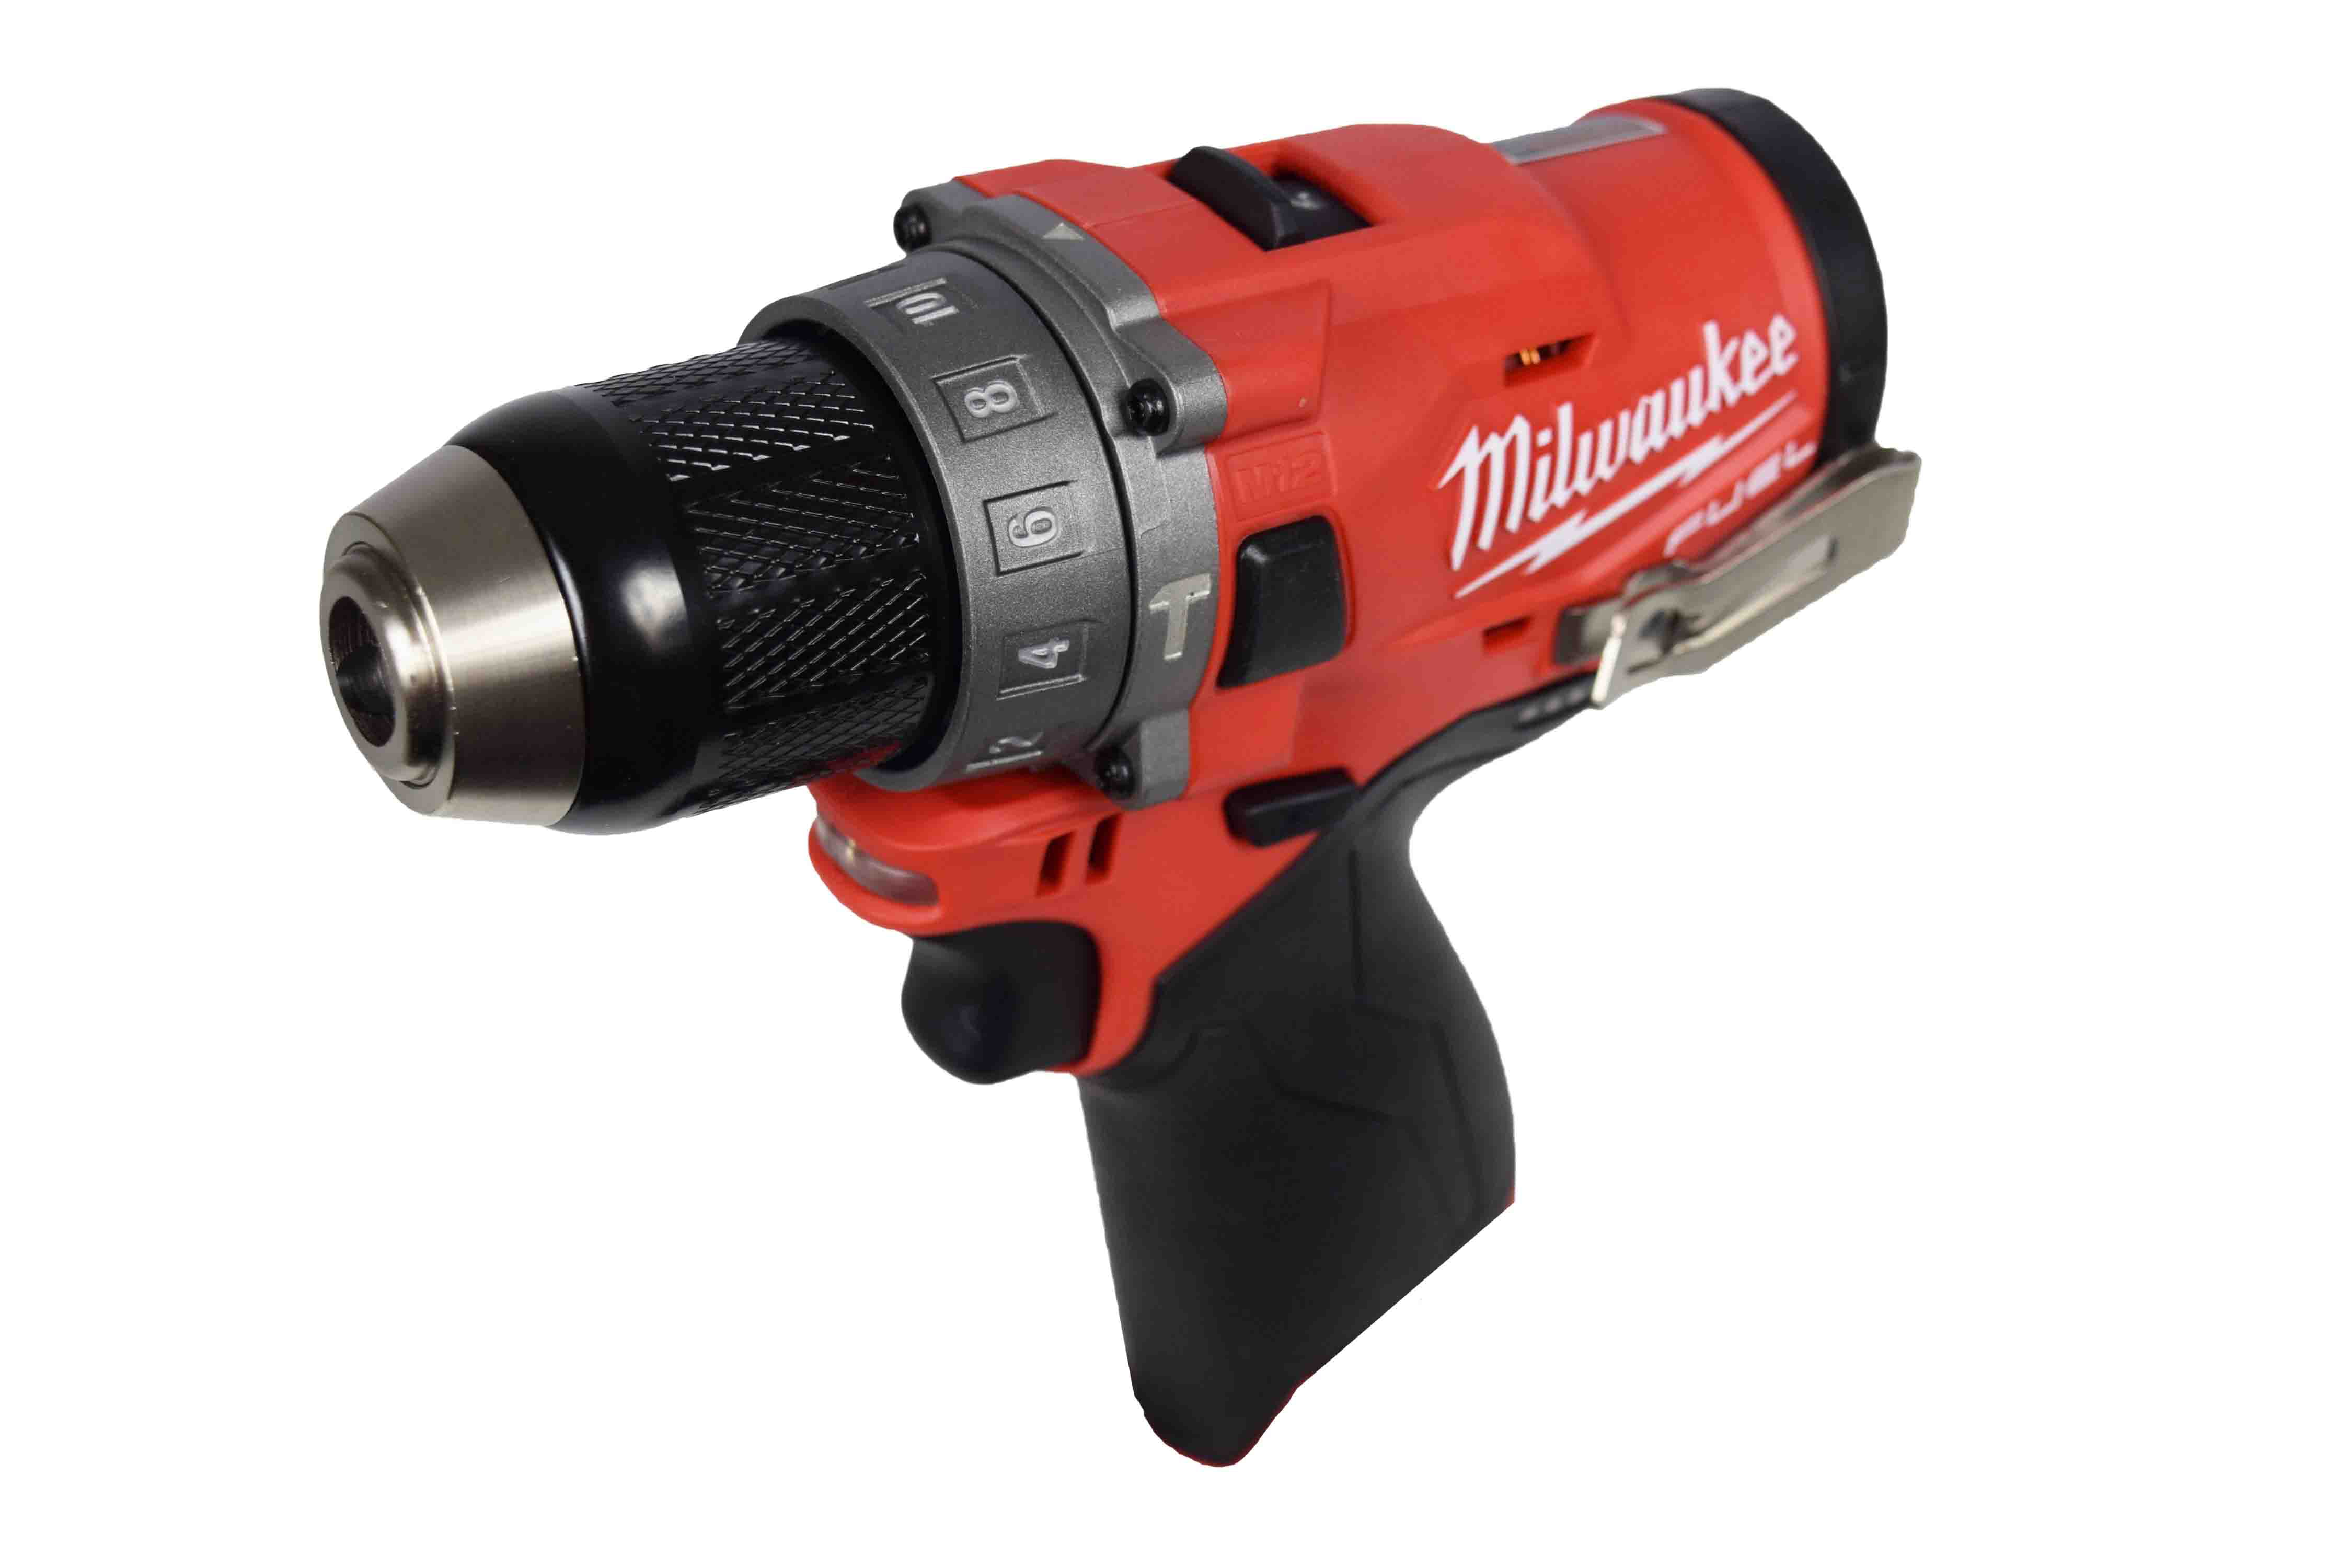 Milwaukee 2504-20 FUEL 1/2" Brushless Hammer Drill12V Replaces 2404-20 Bare Tool 